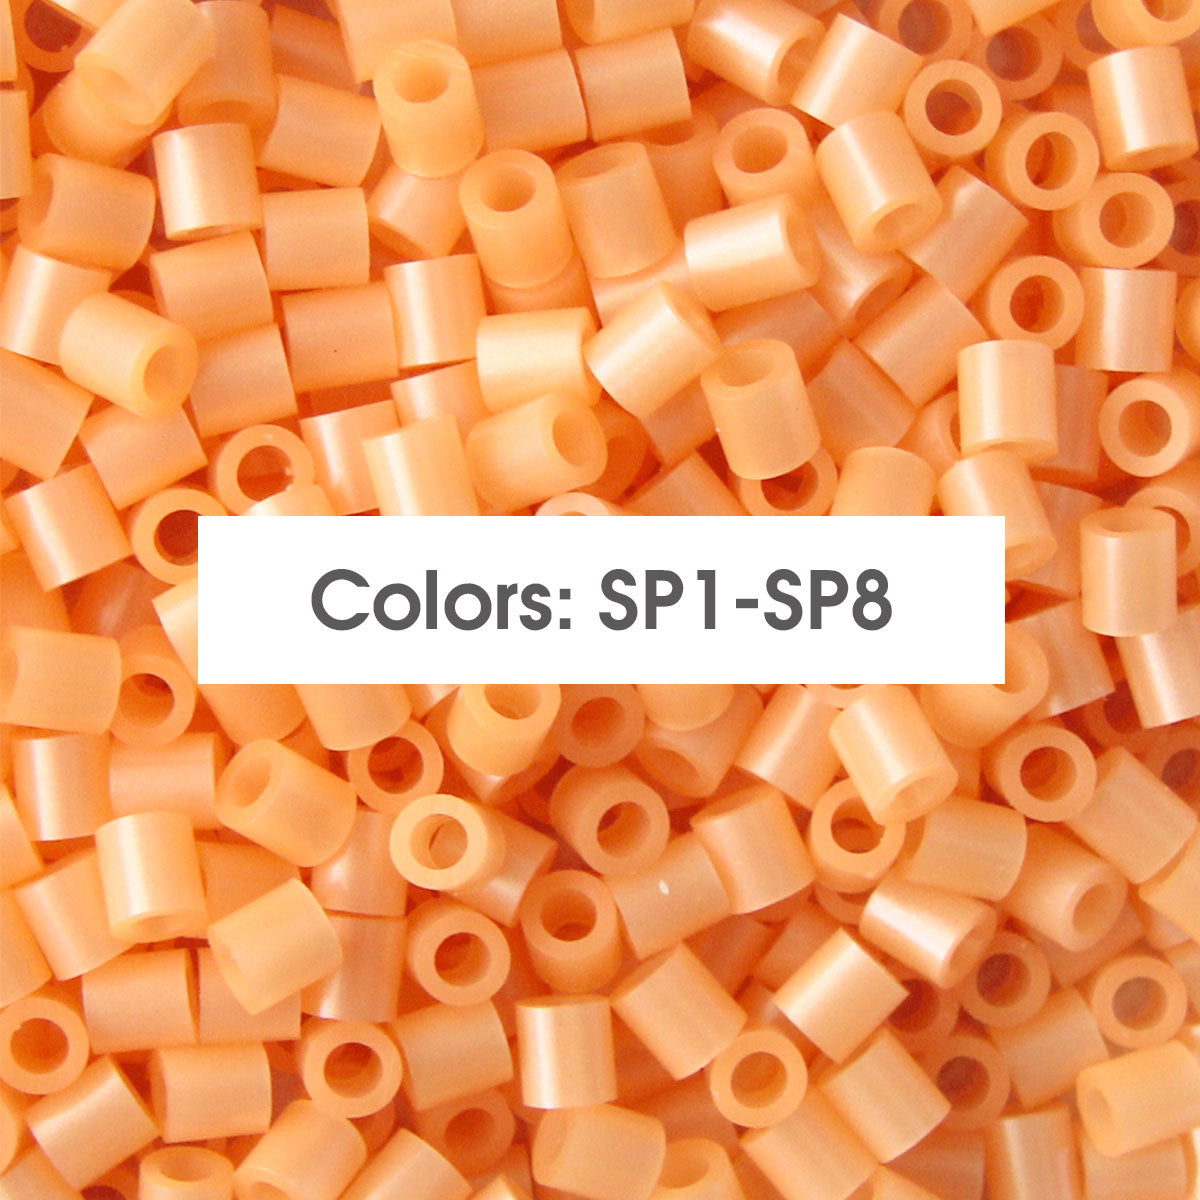 (SP1-SP8 Pearl Colores) S-1KG in mole